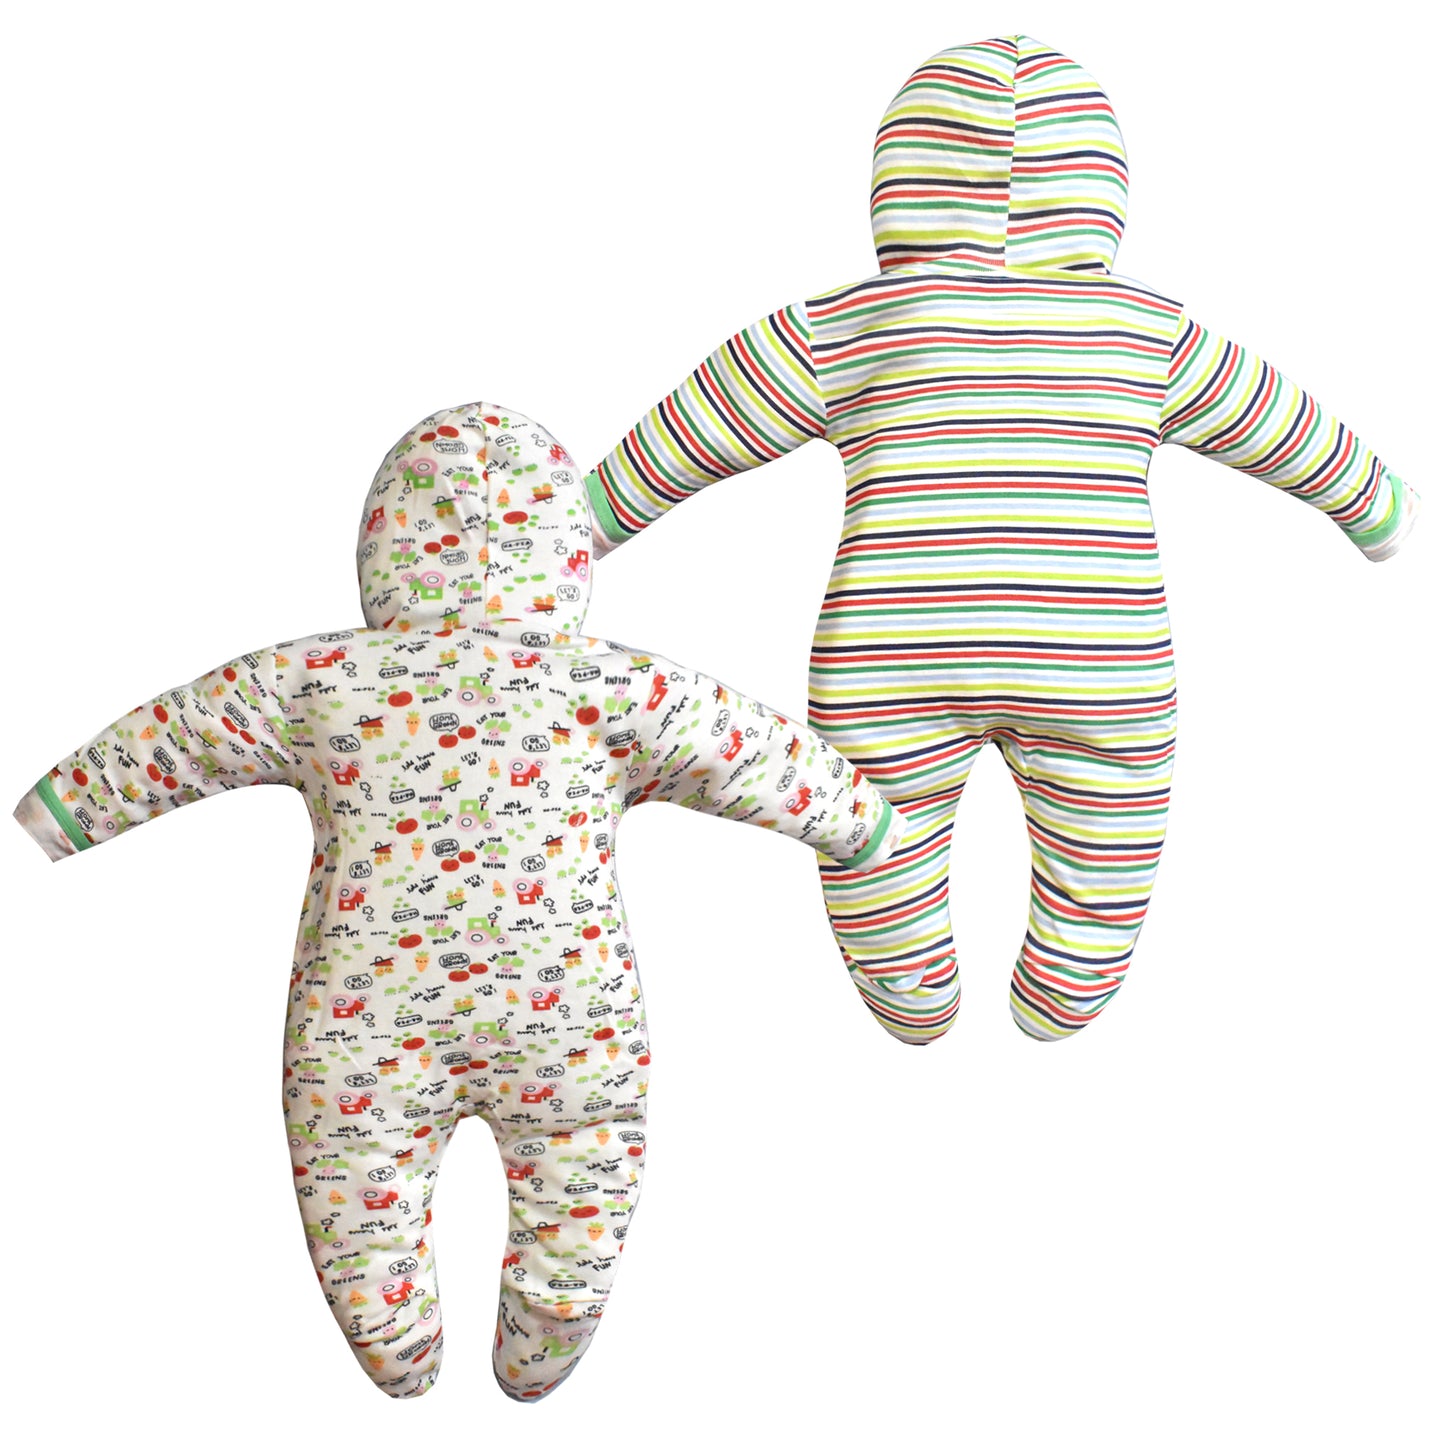 Zoey Green Hooded Full Sleeve Cotton Sleepsuit Rompers for boys & Girls (Pack of 2)